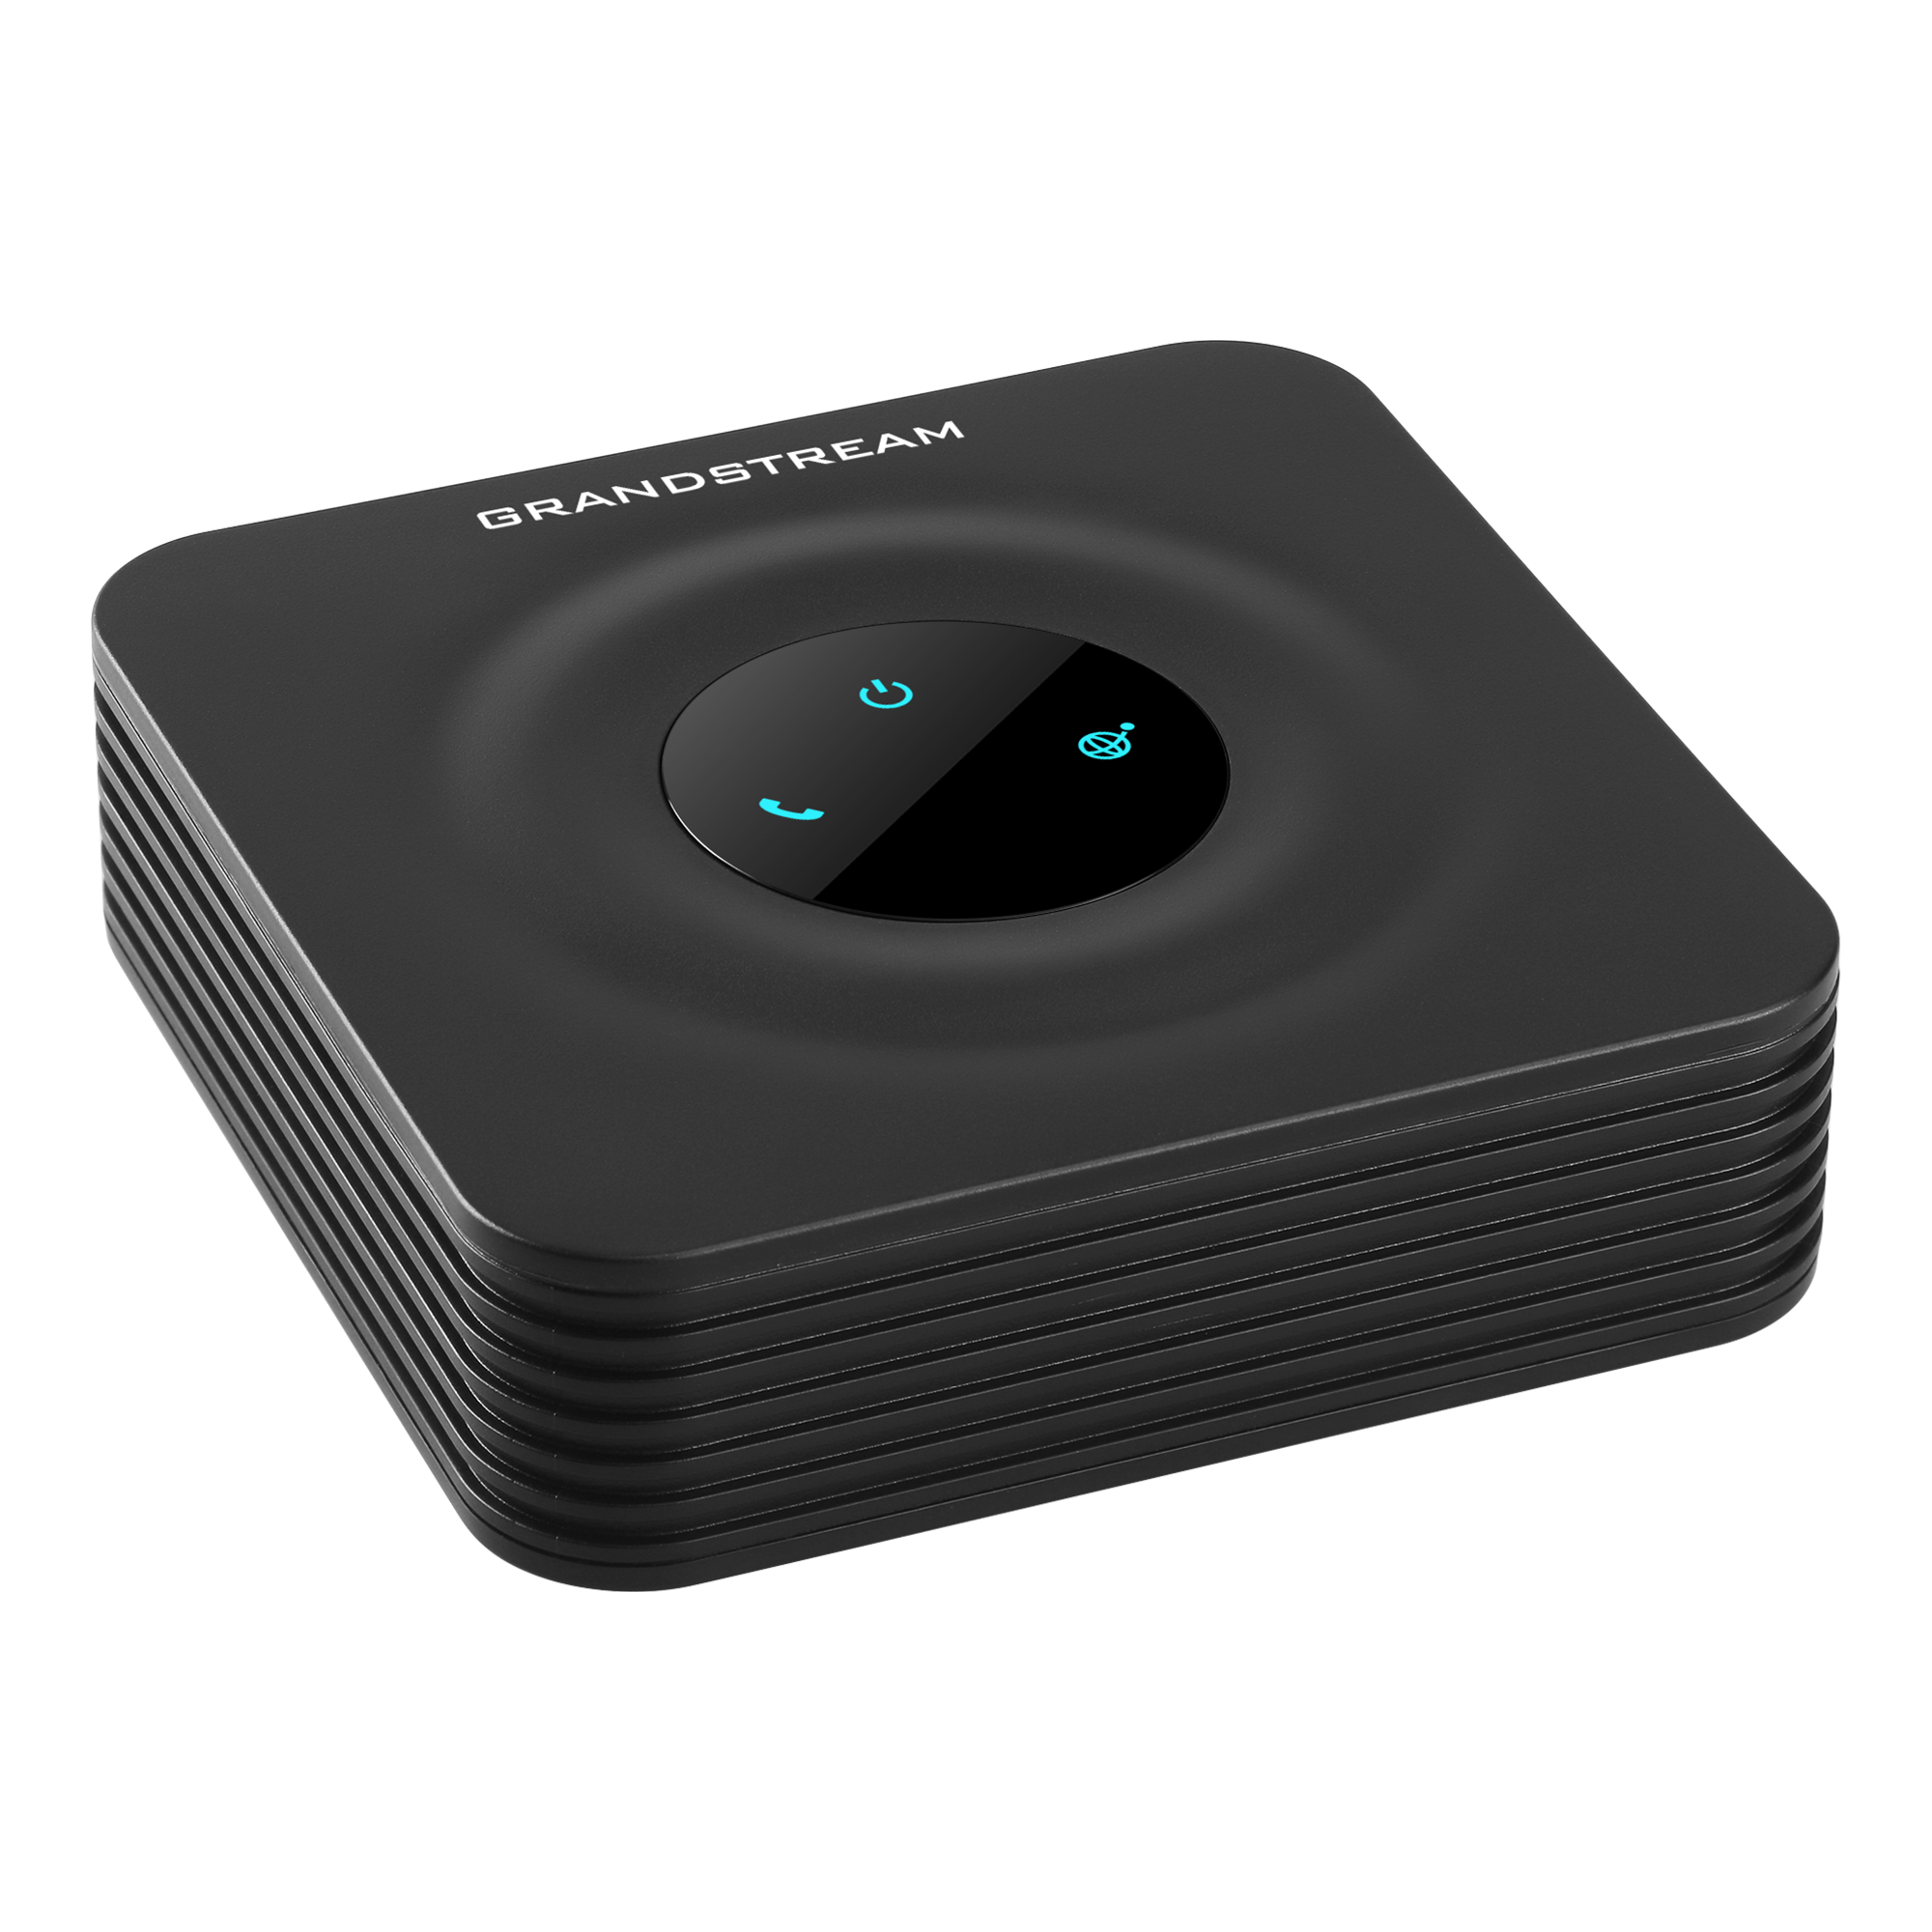 Grandstream Phone Port Adapter for VOIP Service